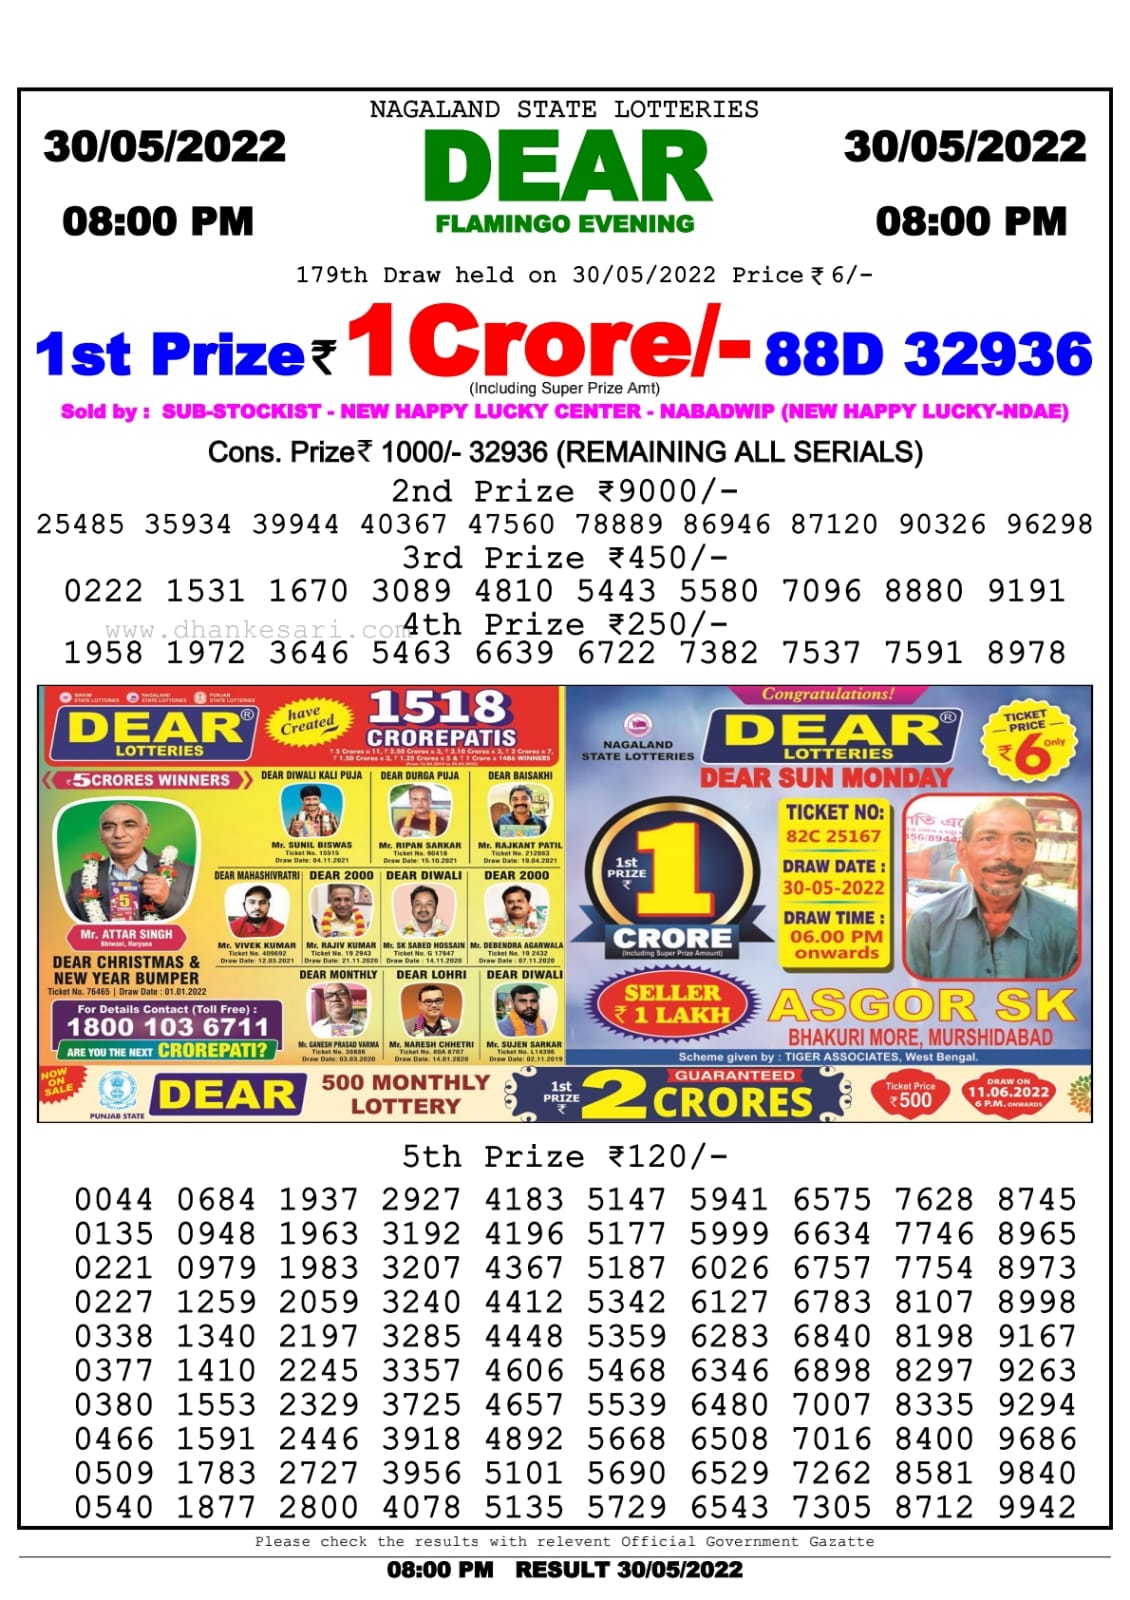 Dear Lottery Nagaland state Lottery Results 08.00 pm 30.05.2022